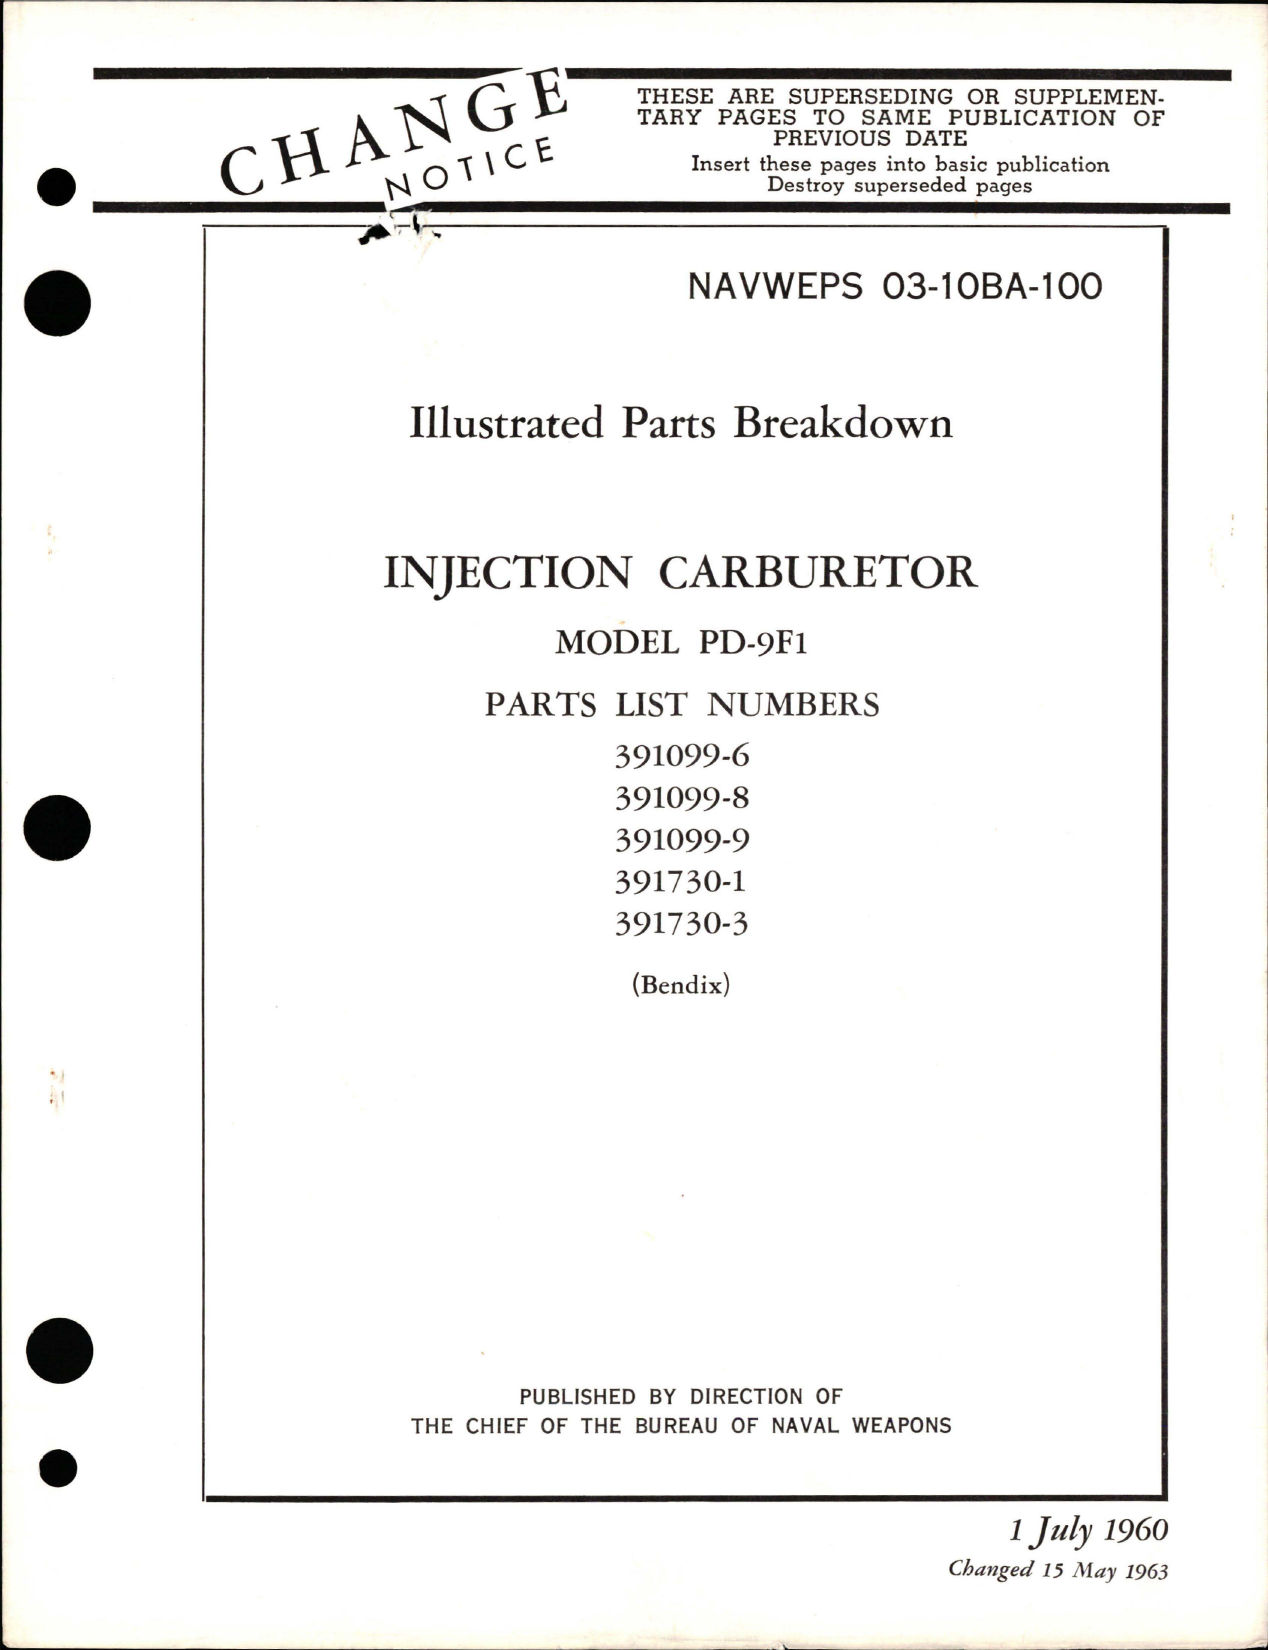 Sample page 1 from AirCorps Library document: Illustrated Parts Breakdown for Injection Carburetor - Model PD-9F1